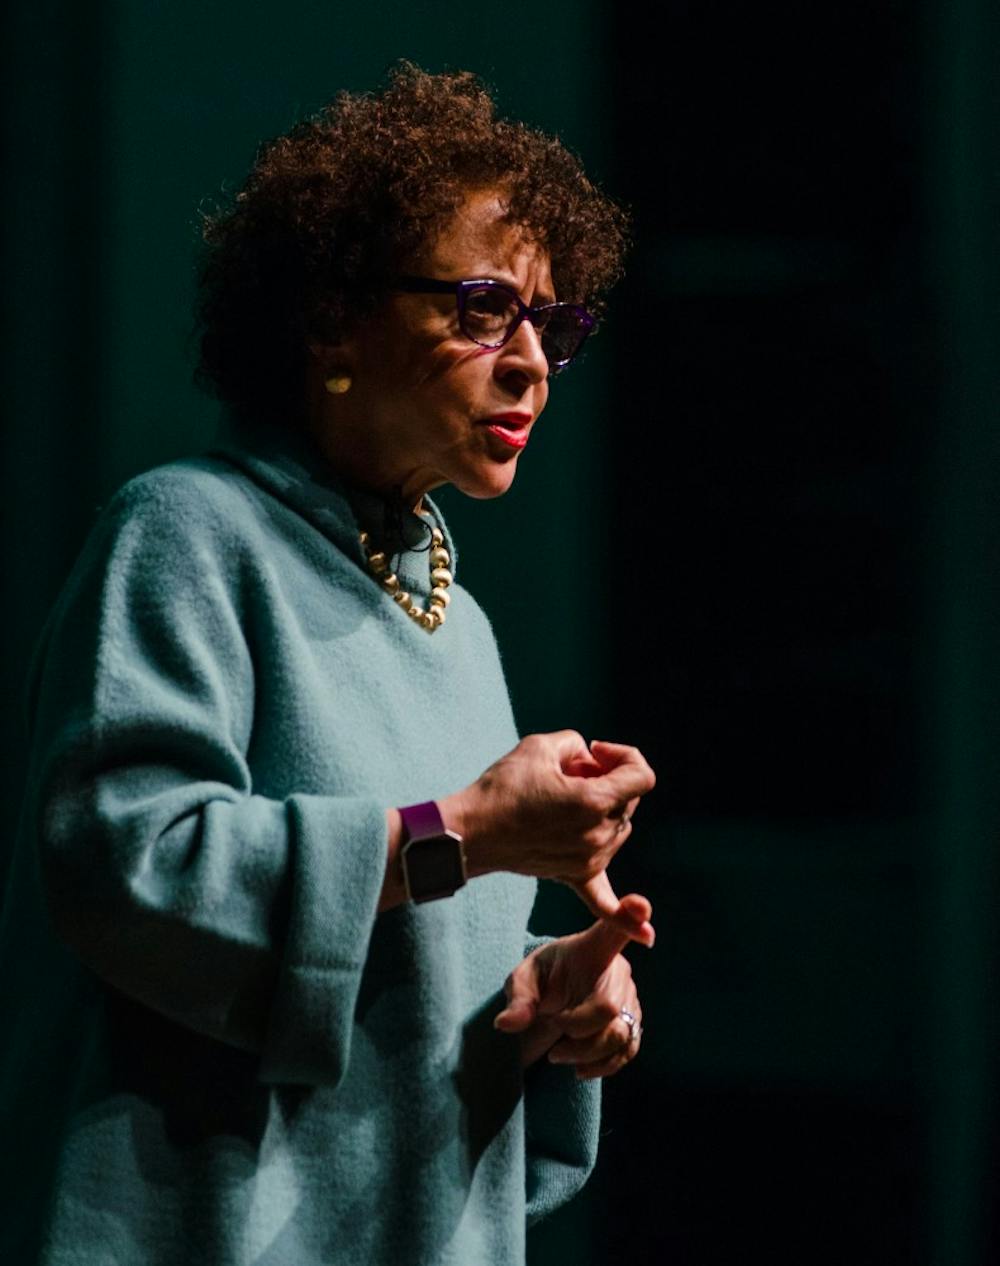 <p>Sheila C. Johnson, co-founder of Black Entertainment Television (BET),&nbsp;spoke at Emens Auditorium on March 28 about "Lessons from a Leader" as part of the Excellence in Leadership lecture series. Johnson encouraged students to find their own path instead of following someone else's. <em>DN PHOTO KELLEN HAZELIP</em></p>